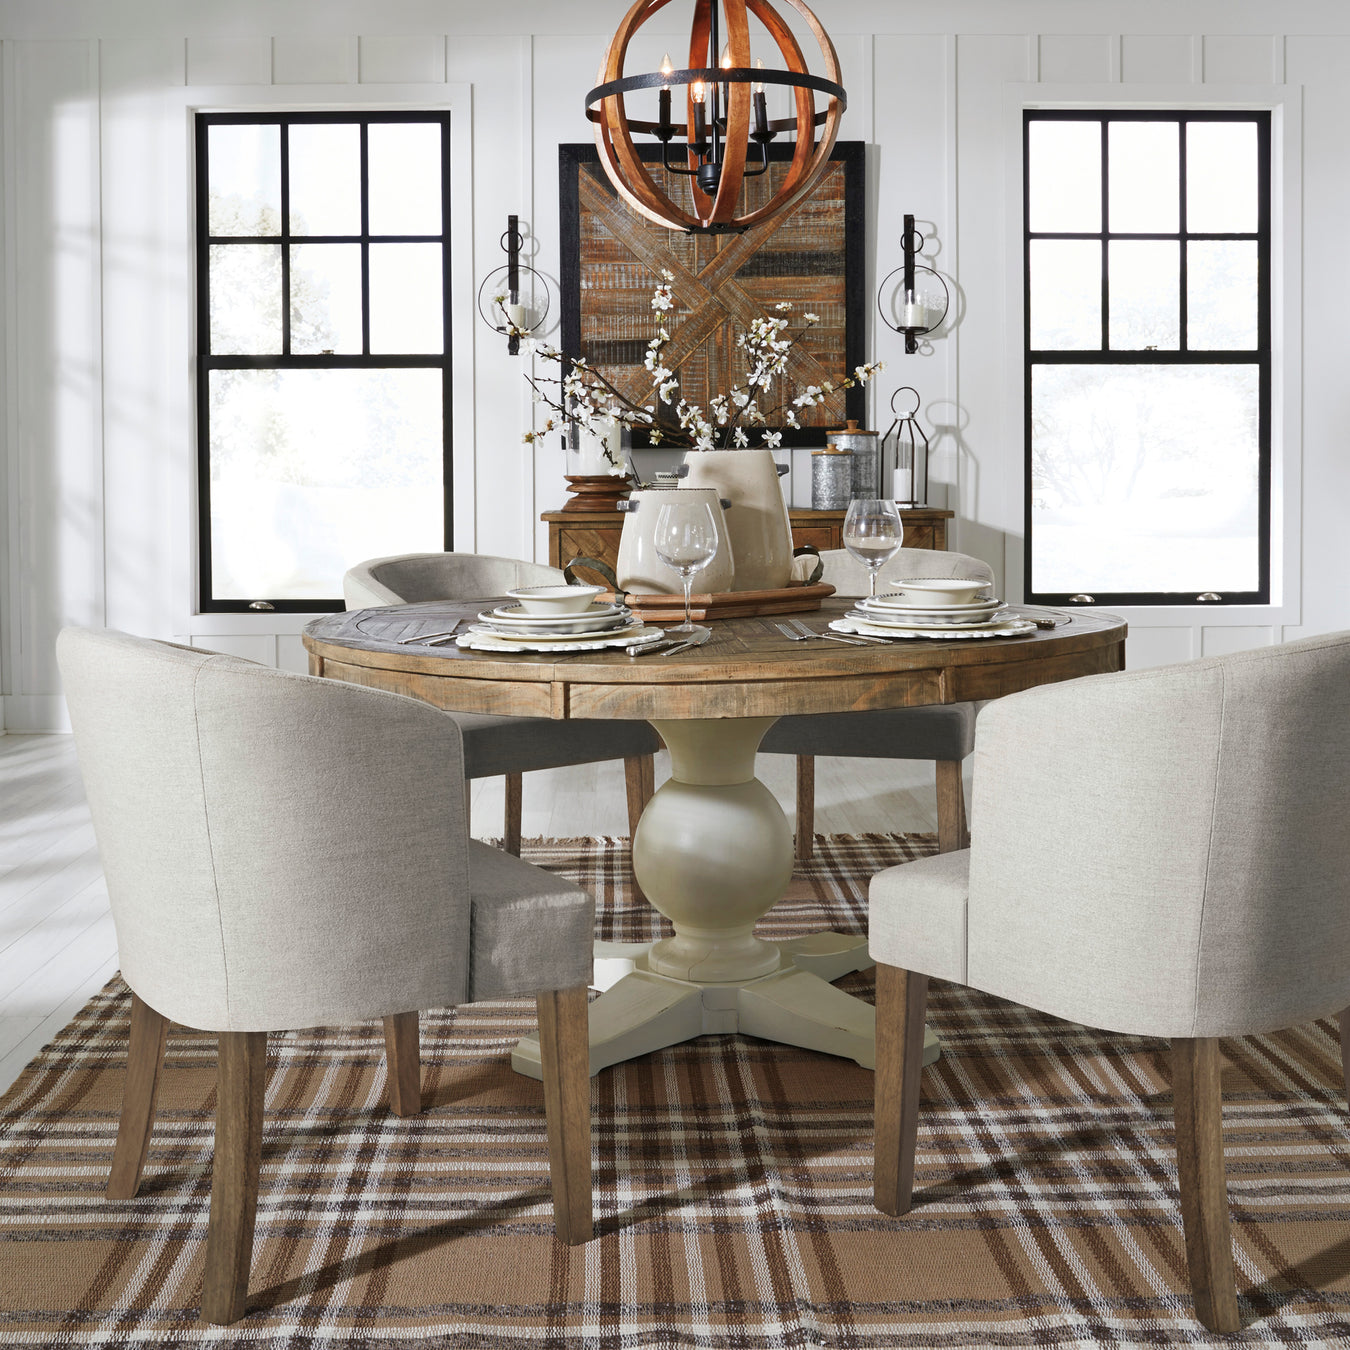 Shop Dining Room Furniture at the Best Discount Furniture Store in Durham, NC